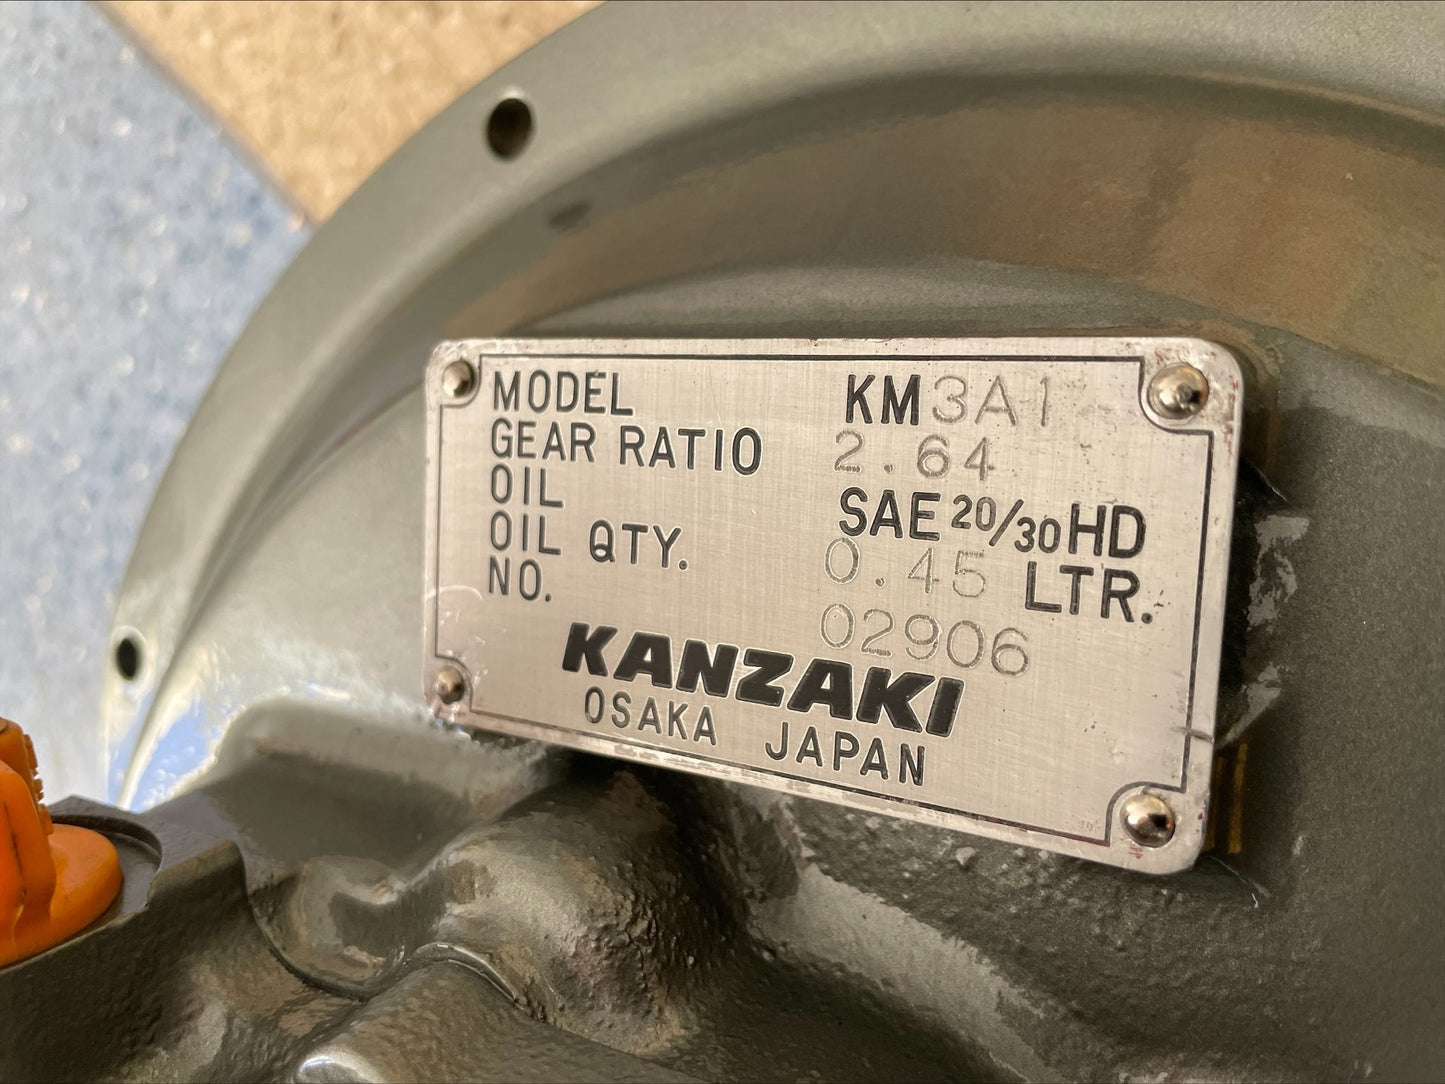 Gearbox KANZAKI KM3A1 Ratio 2.64 for Yanmar 3JH engines